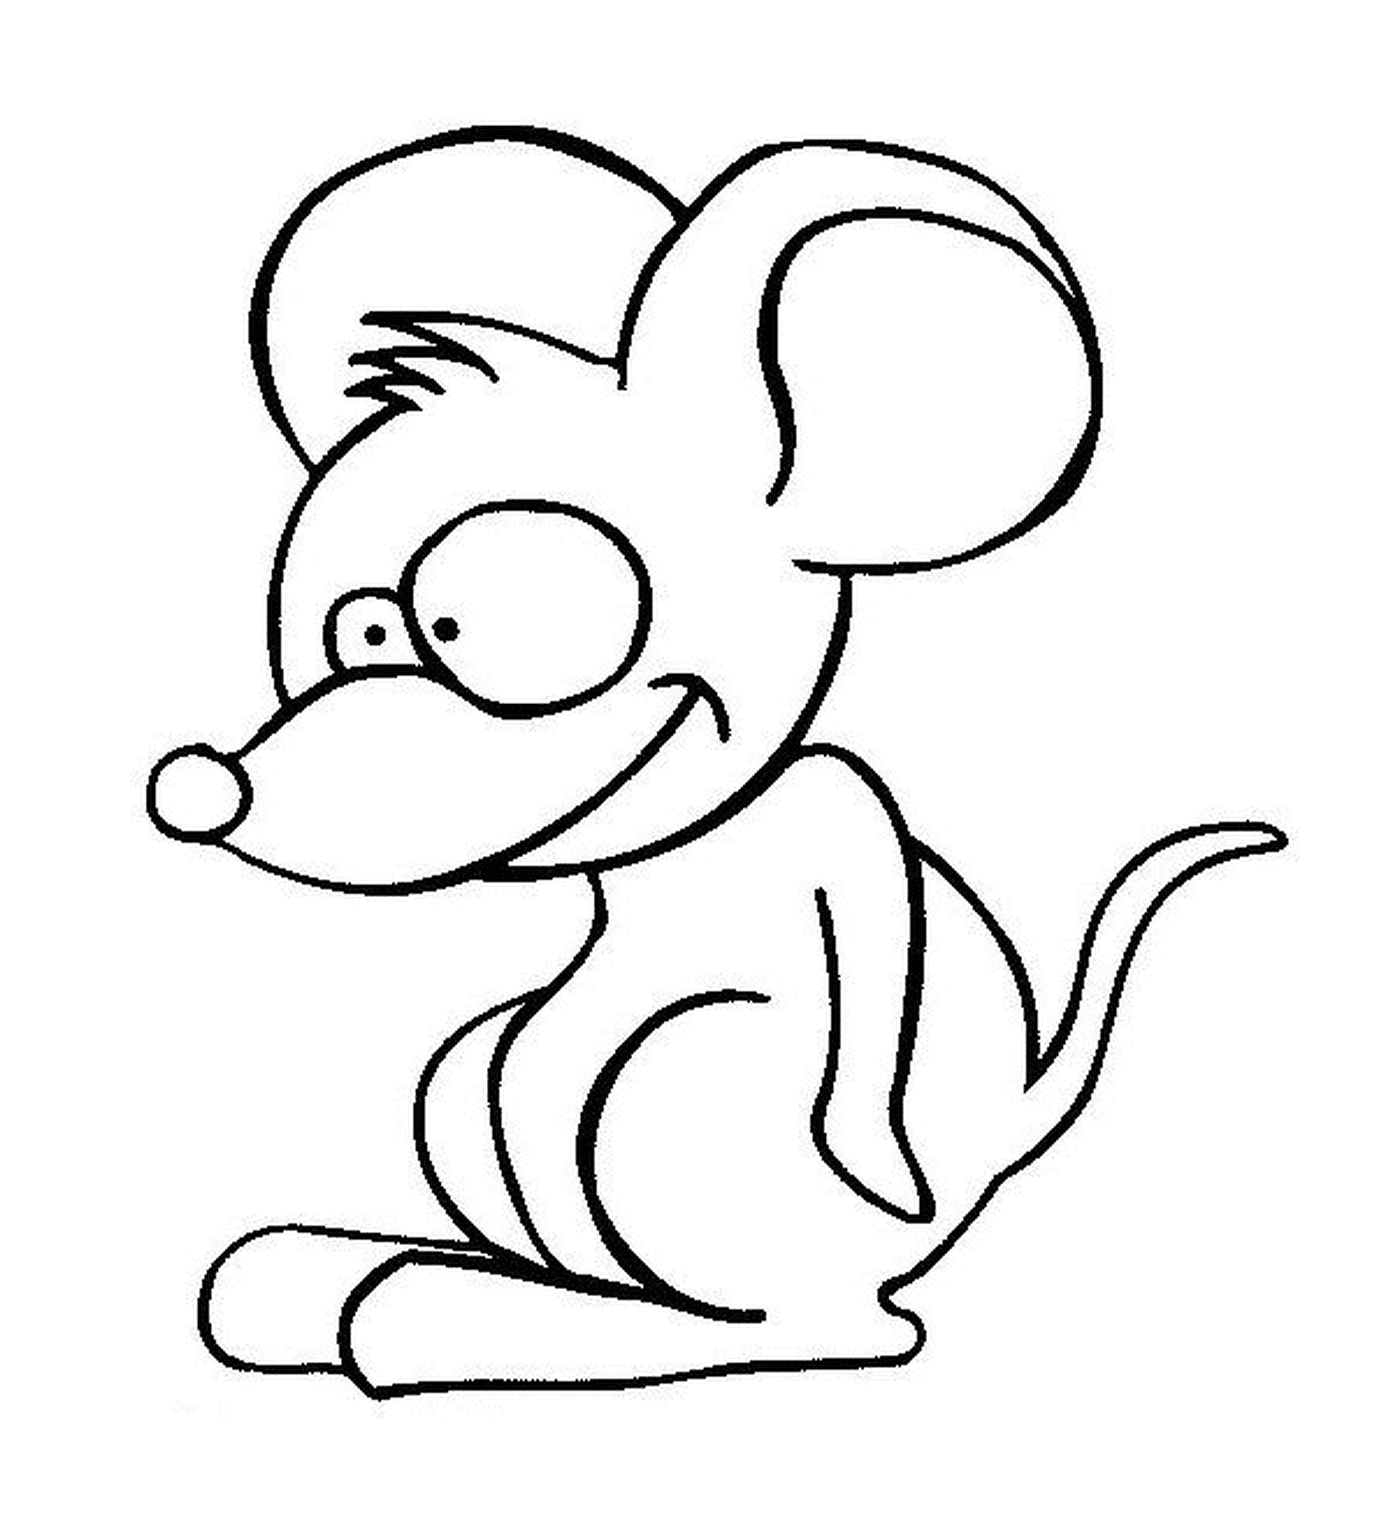  A mouse with a big head 